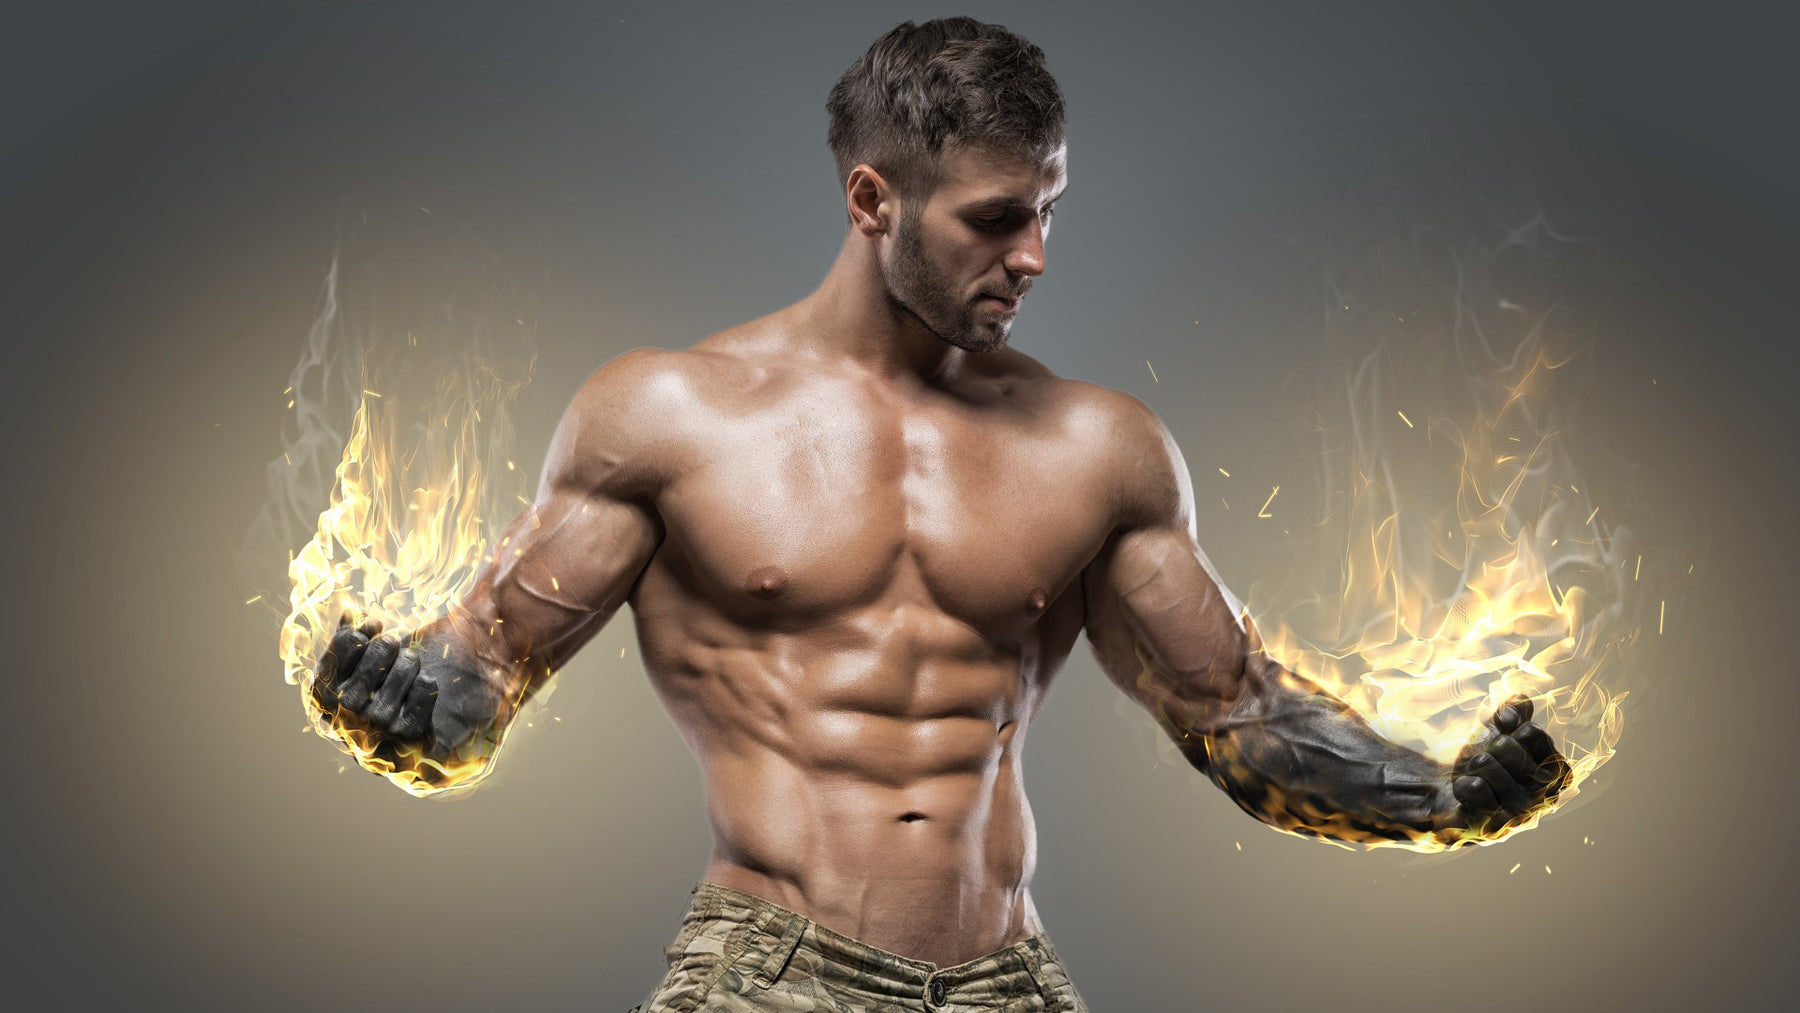 How to Build Muscle Naturally at an Optimal Rate